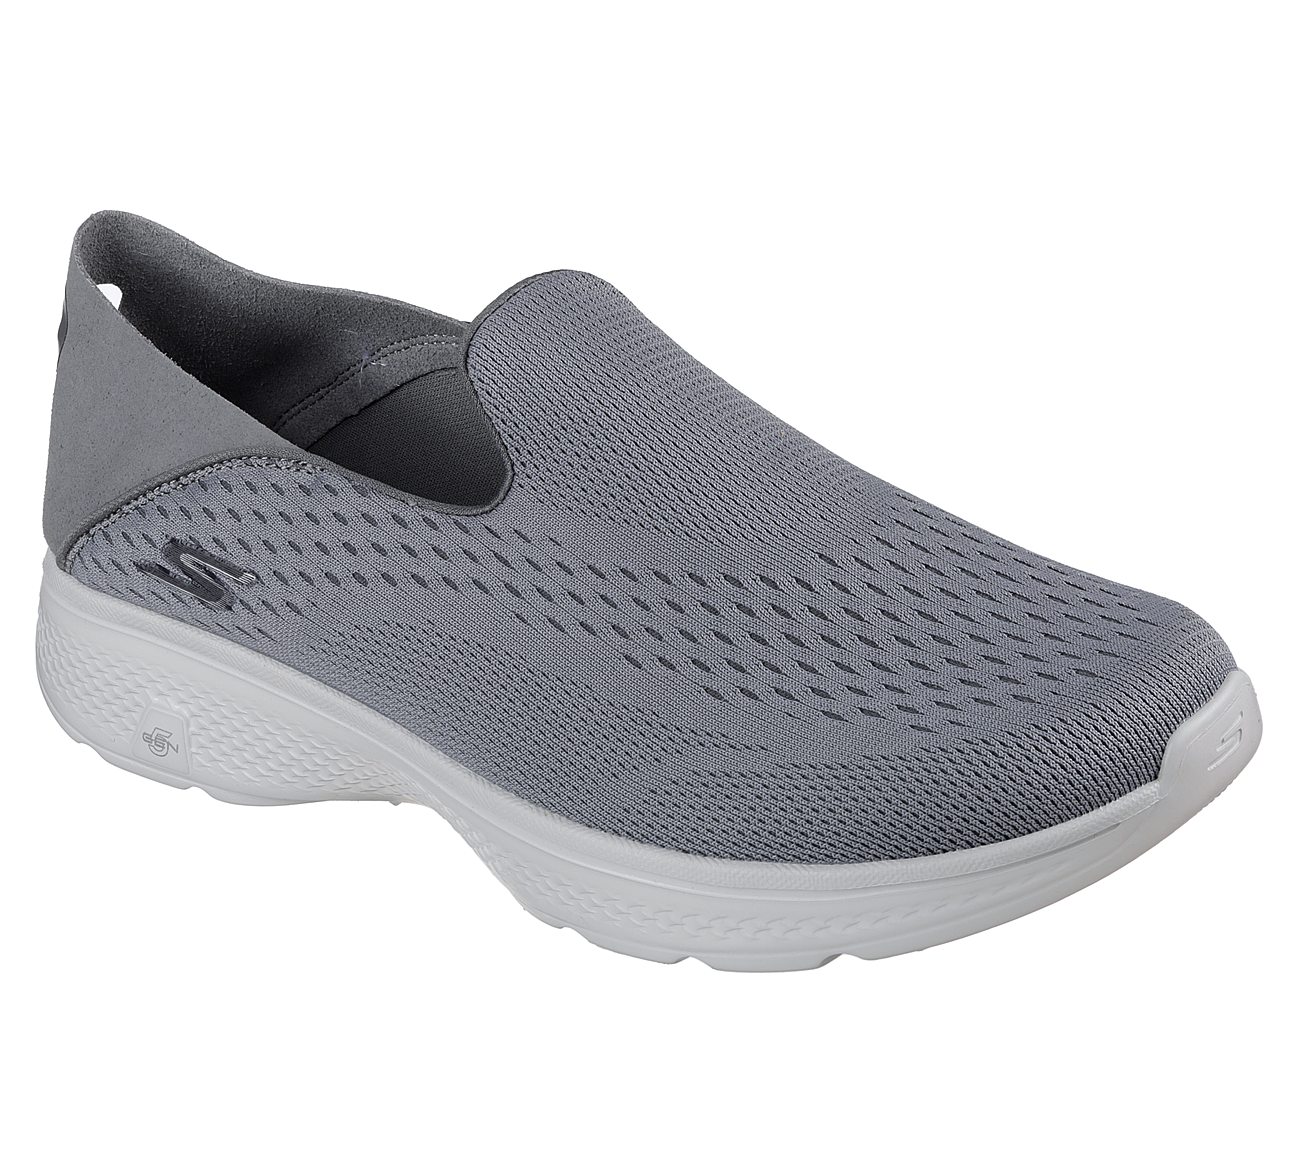 GO WALK 4- CONVERTIBLE, CCHARCOAL Footwear Lateral View